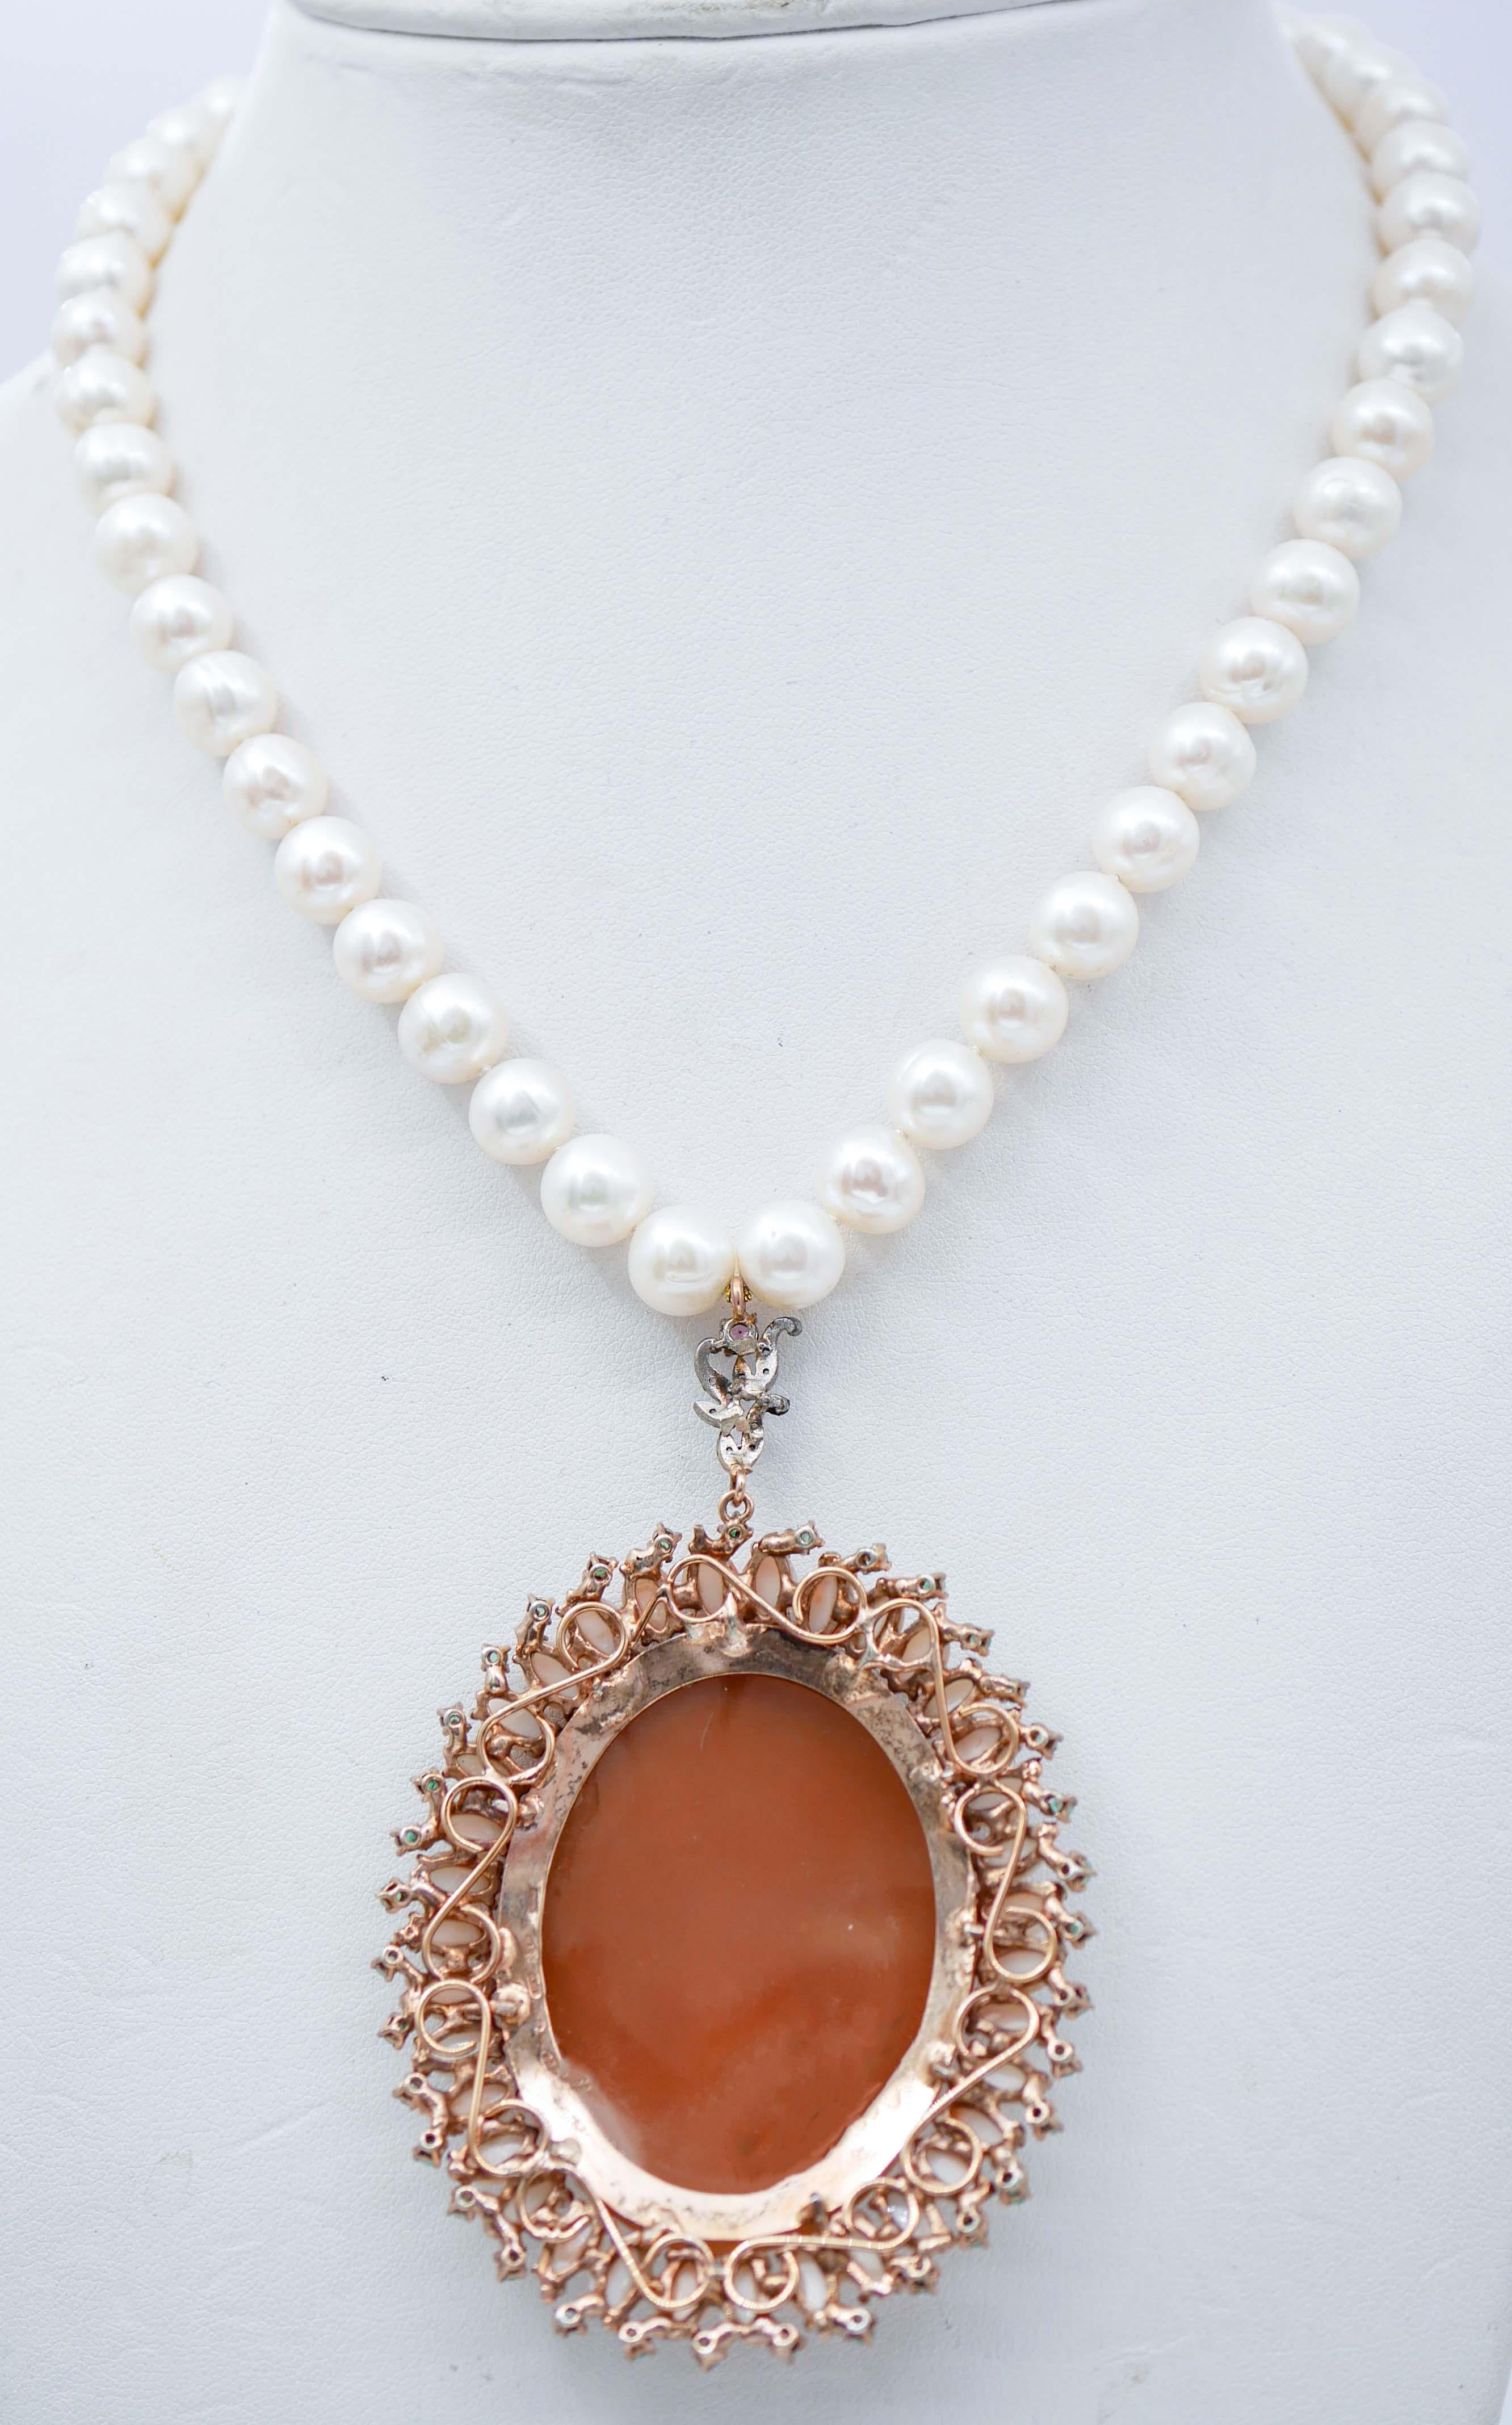 Mixed Cut Coral, Pearls, Diamonds, Rubies, Emeralds, Cameo, Rose Gold and Silver Necklace